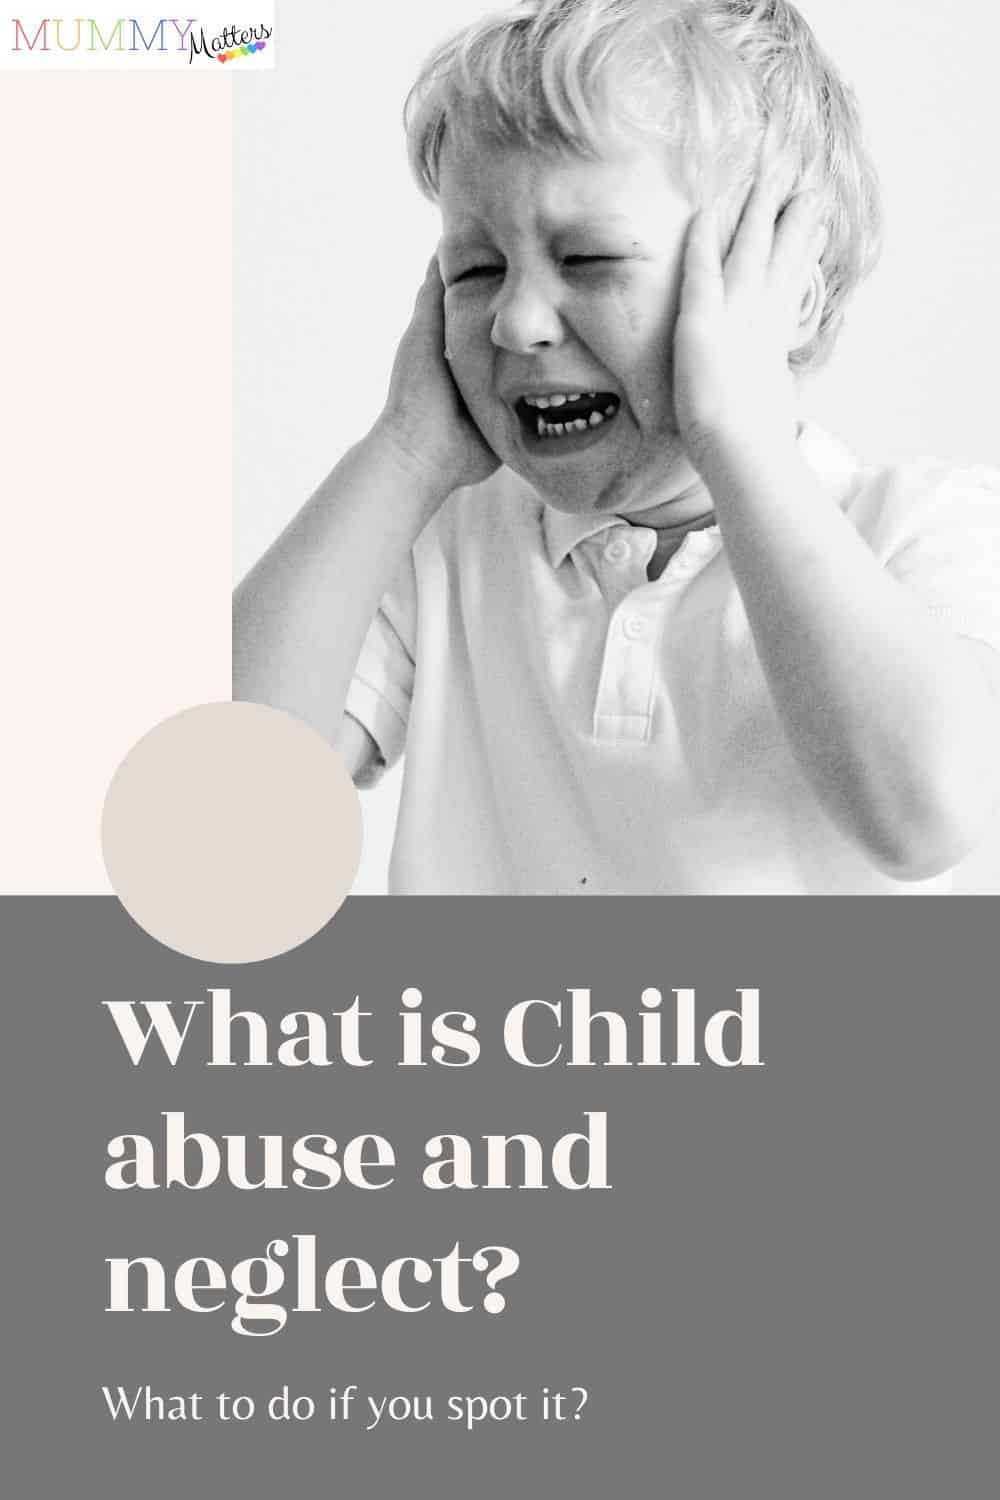 Child abuse and neglect are sadly far more common than you would think. How would you know how to spot the signs and what action can you take if you suspect it?